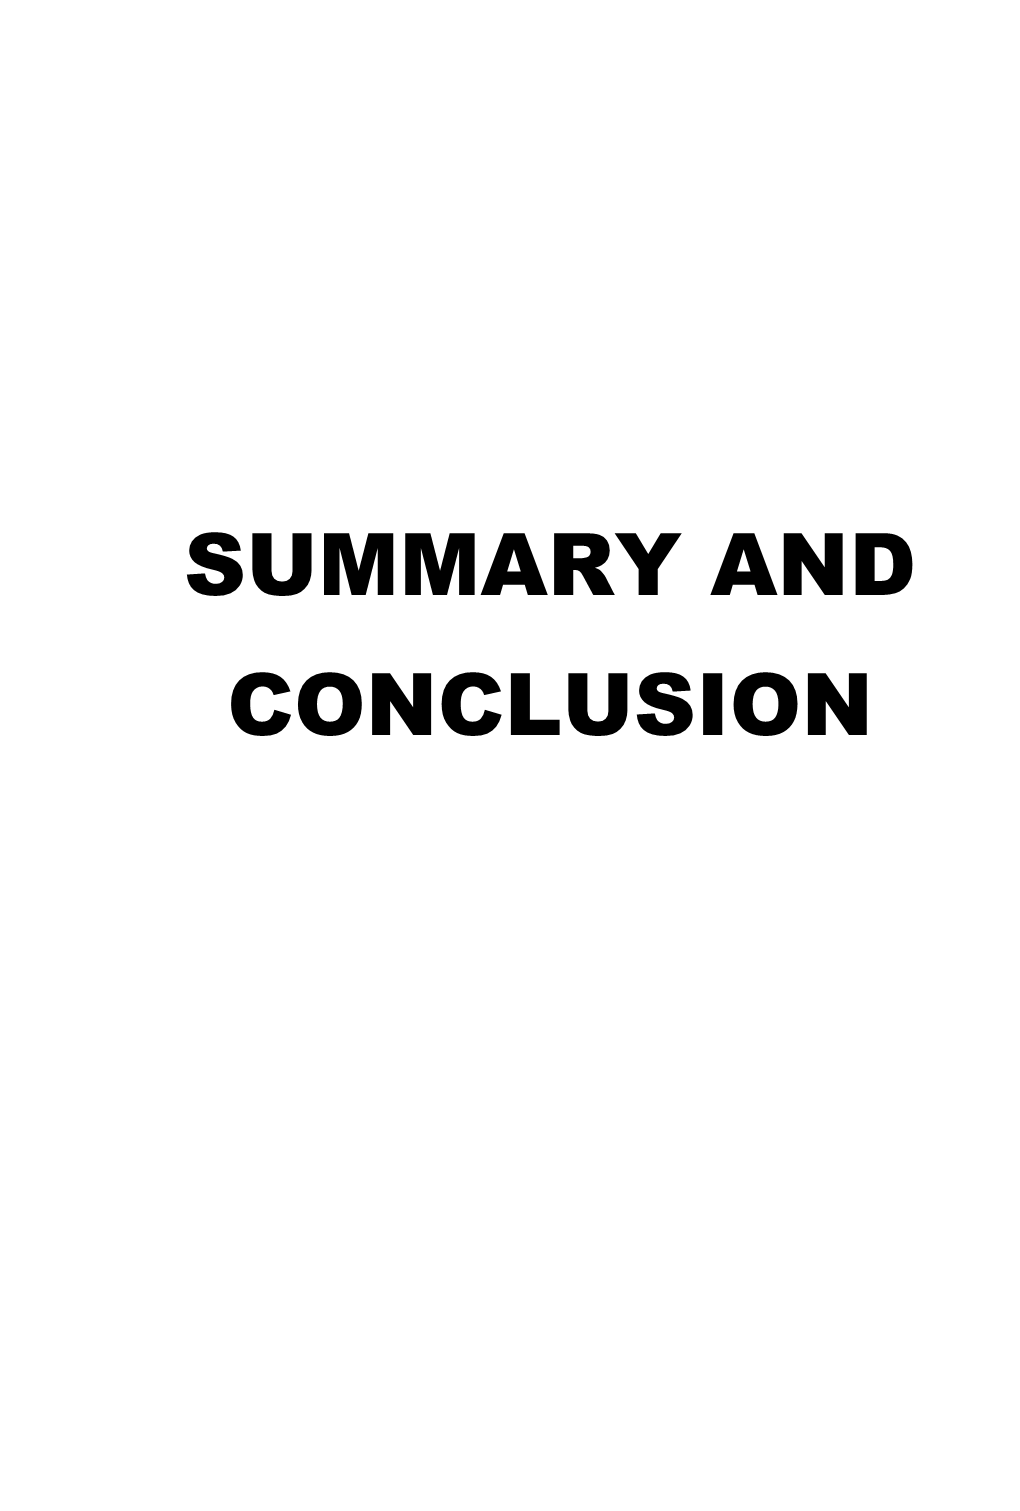 Summary and Conclusion